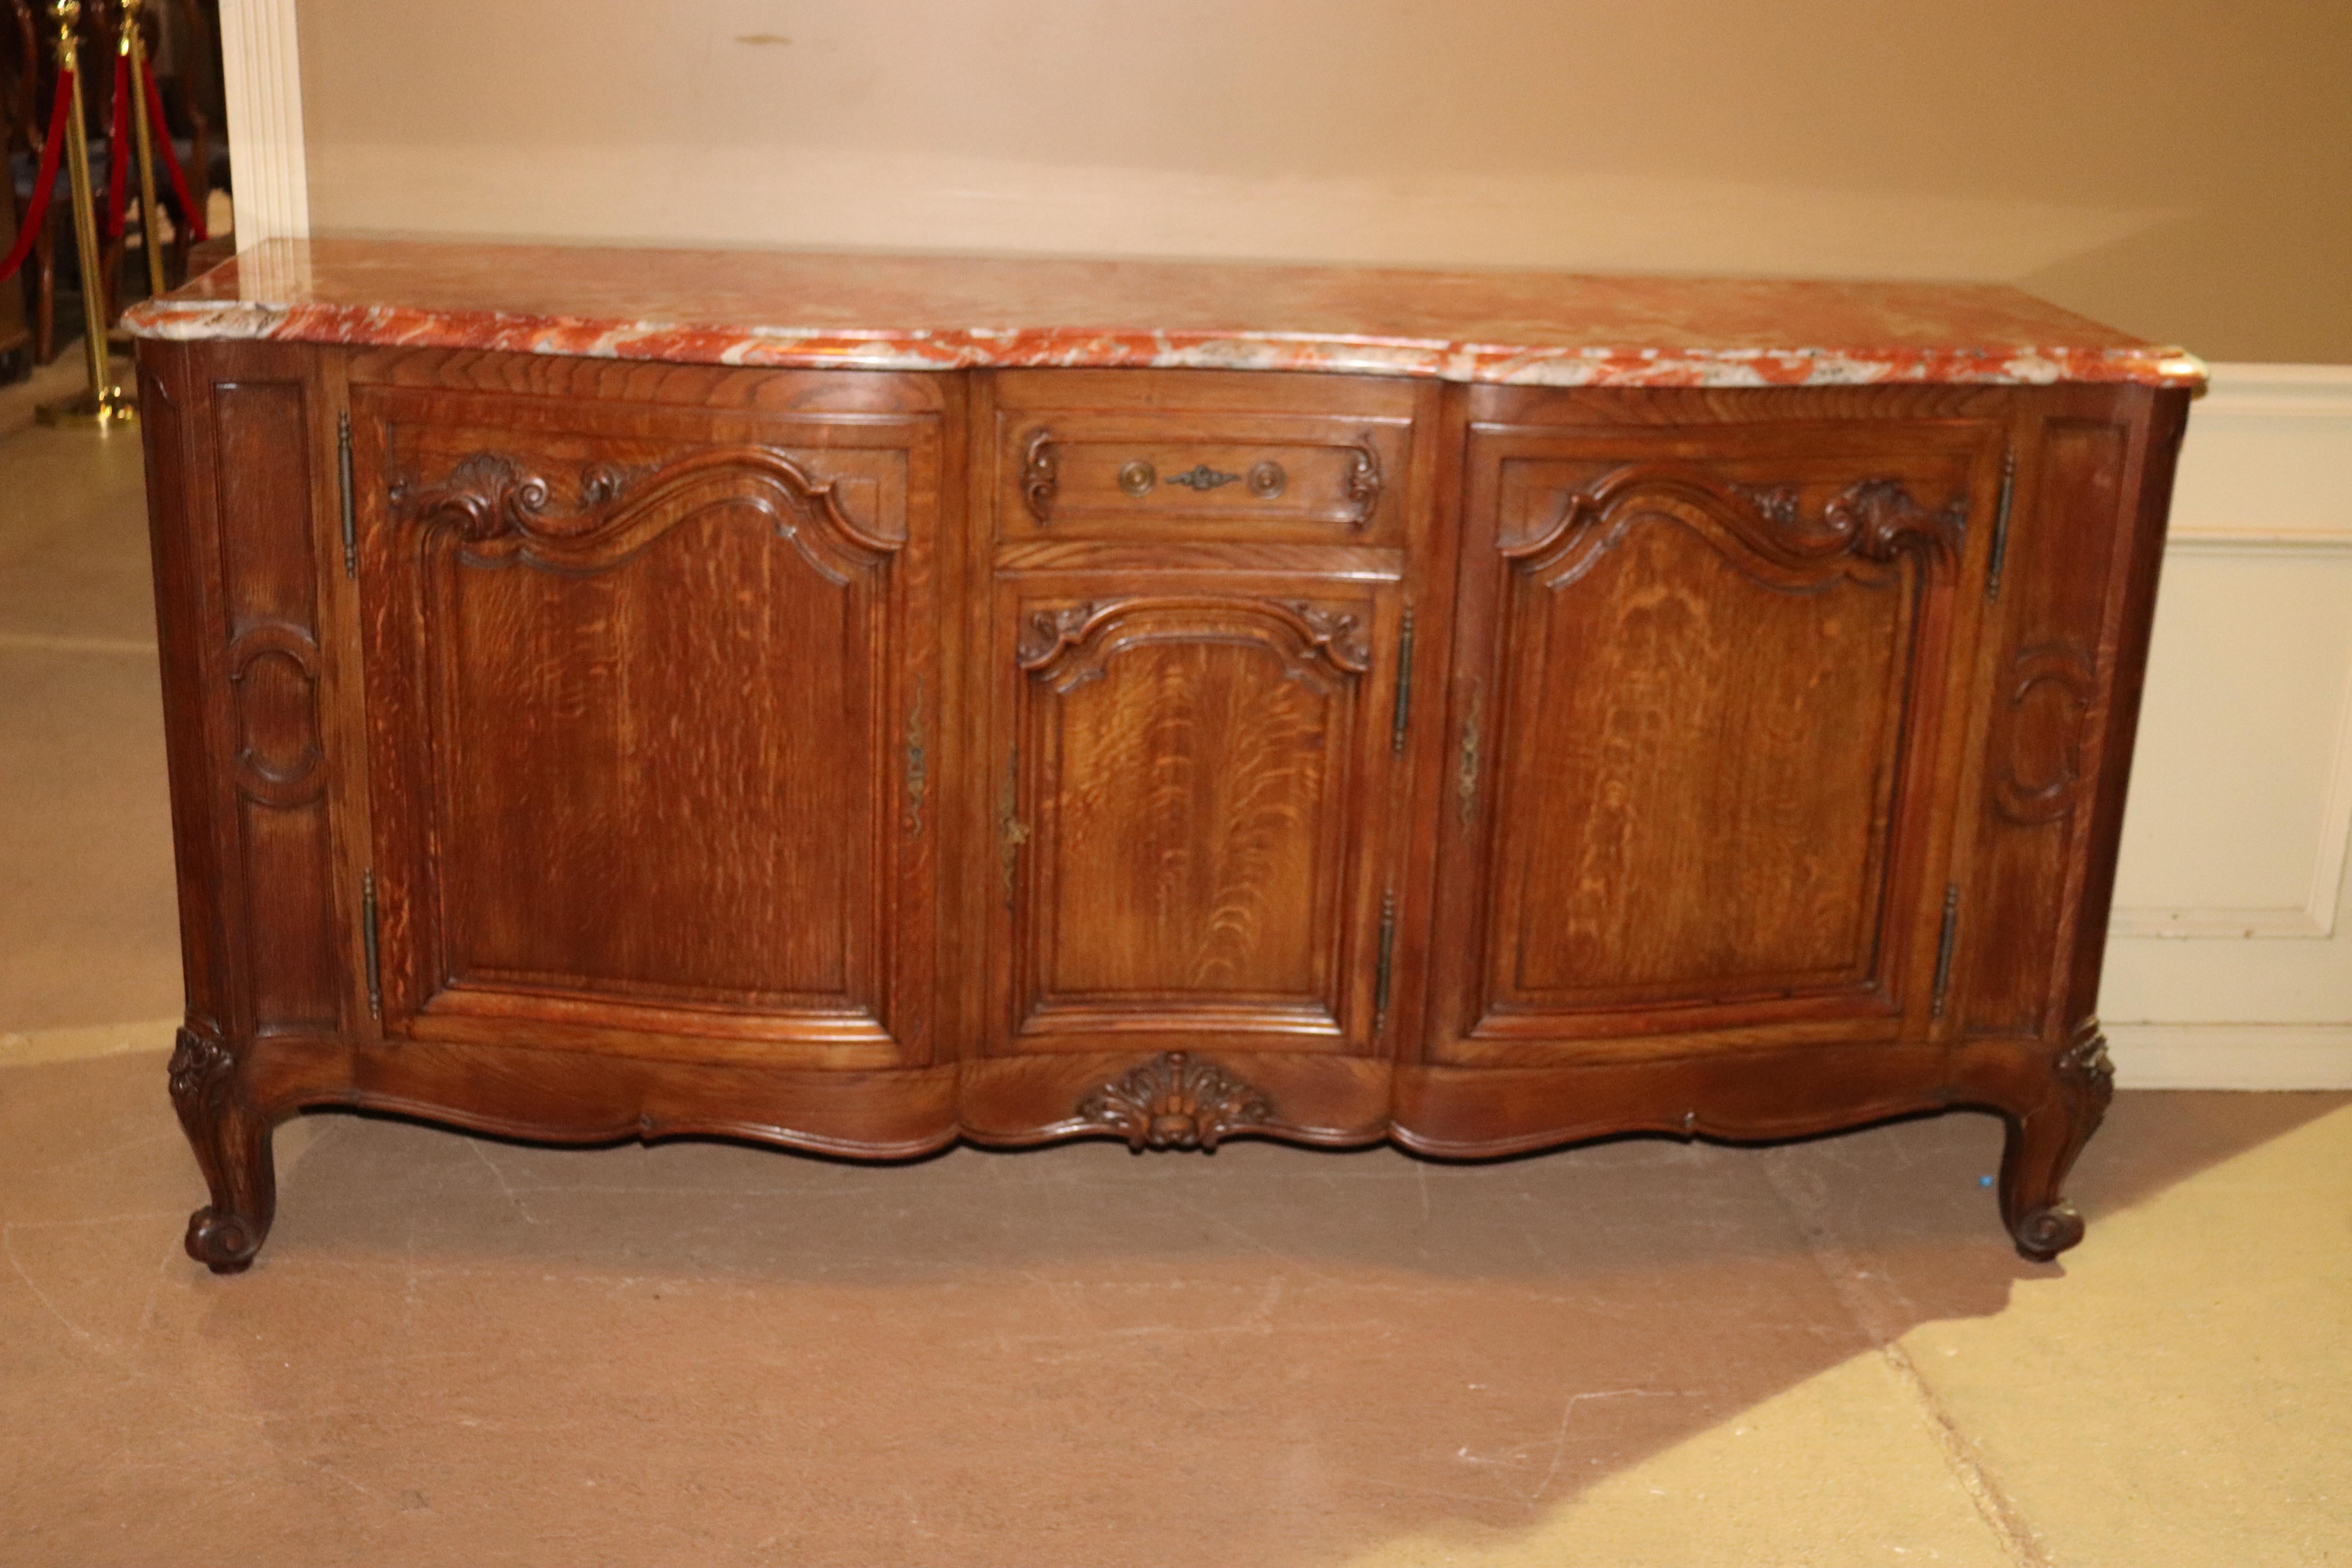 This is a superb example of fine French craftsmanship. Look at the fantastic marble top and gorgeous tiger oak case. The bail-pull will be installed when the piece is delivered. The piece was shot without it but we have it and will put it on for